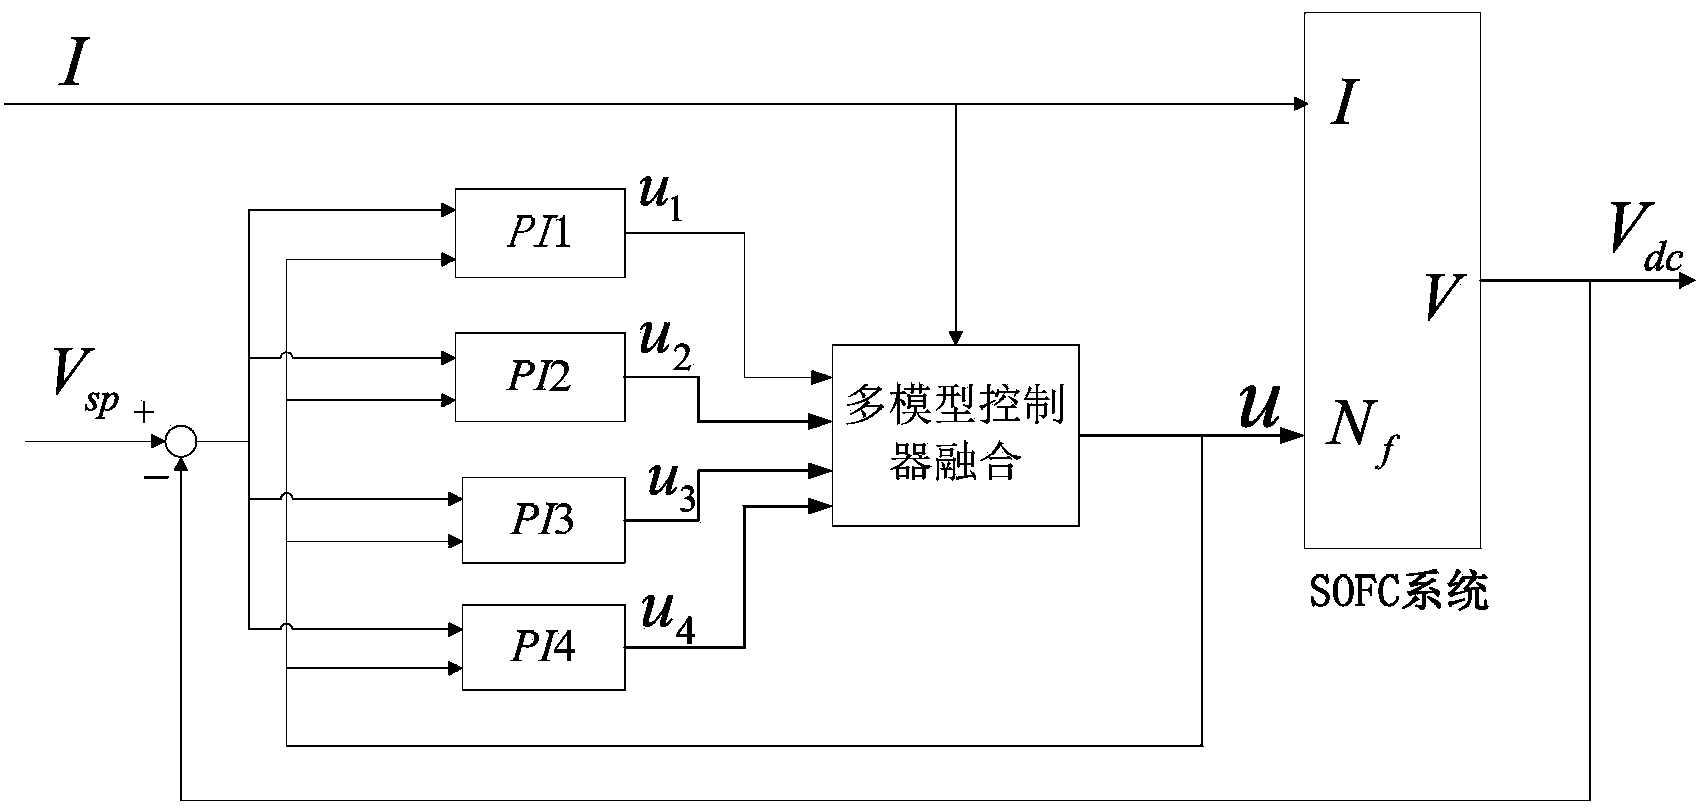 Voltage multi-model fusion control method for solid oxide fuel cell